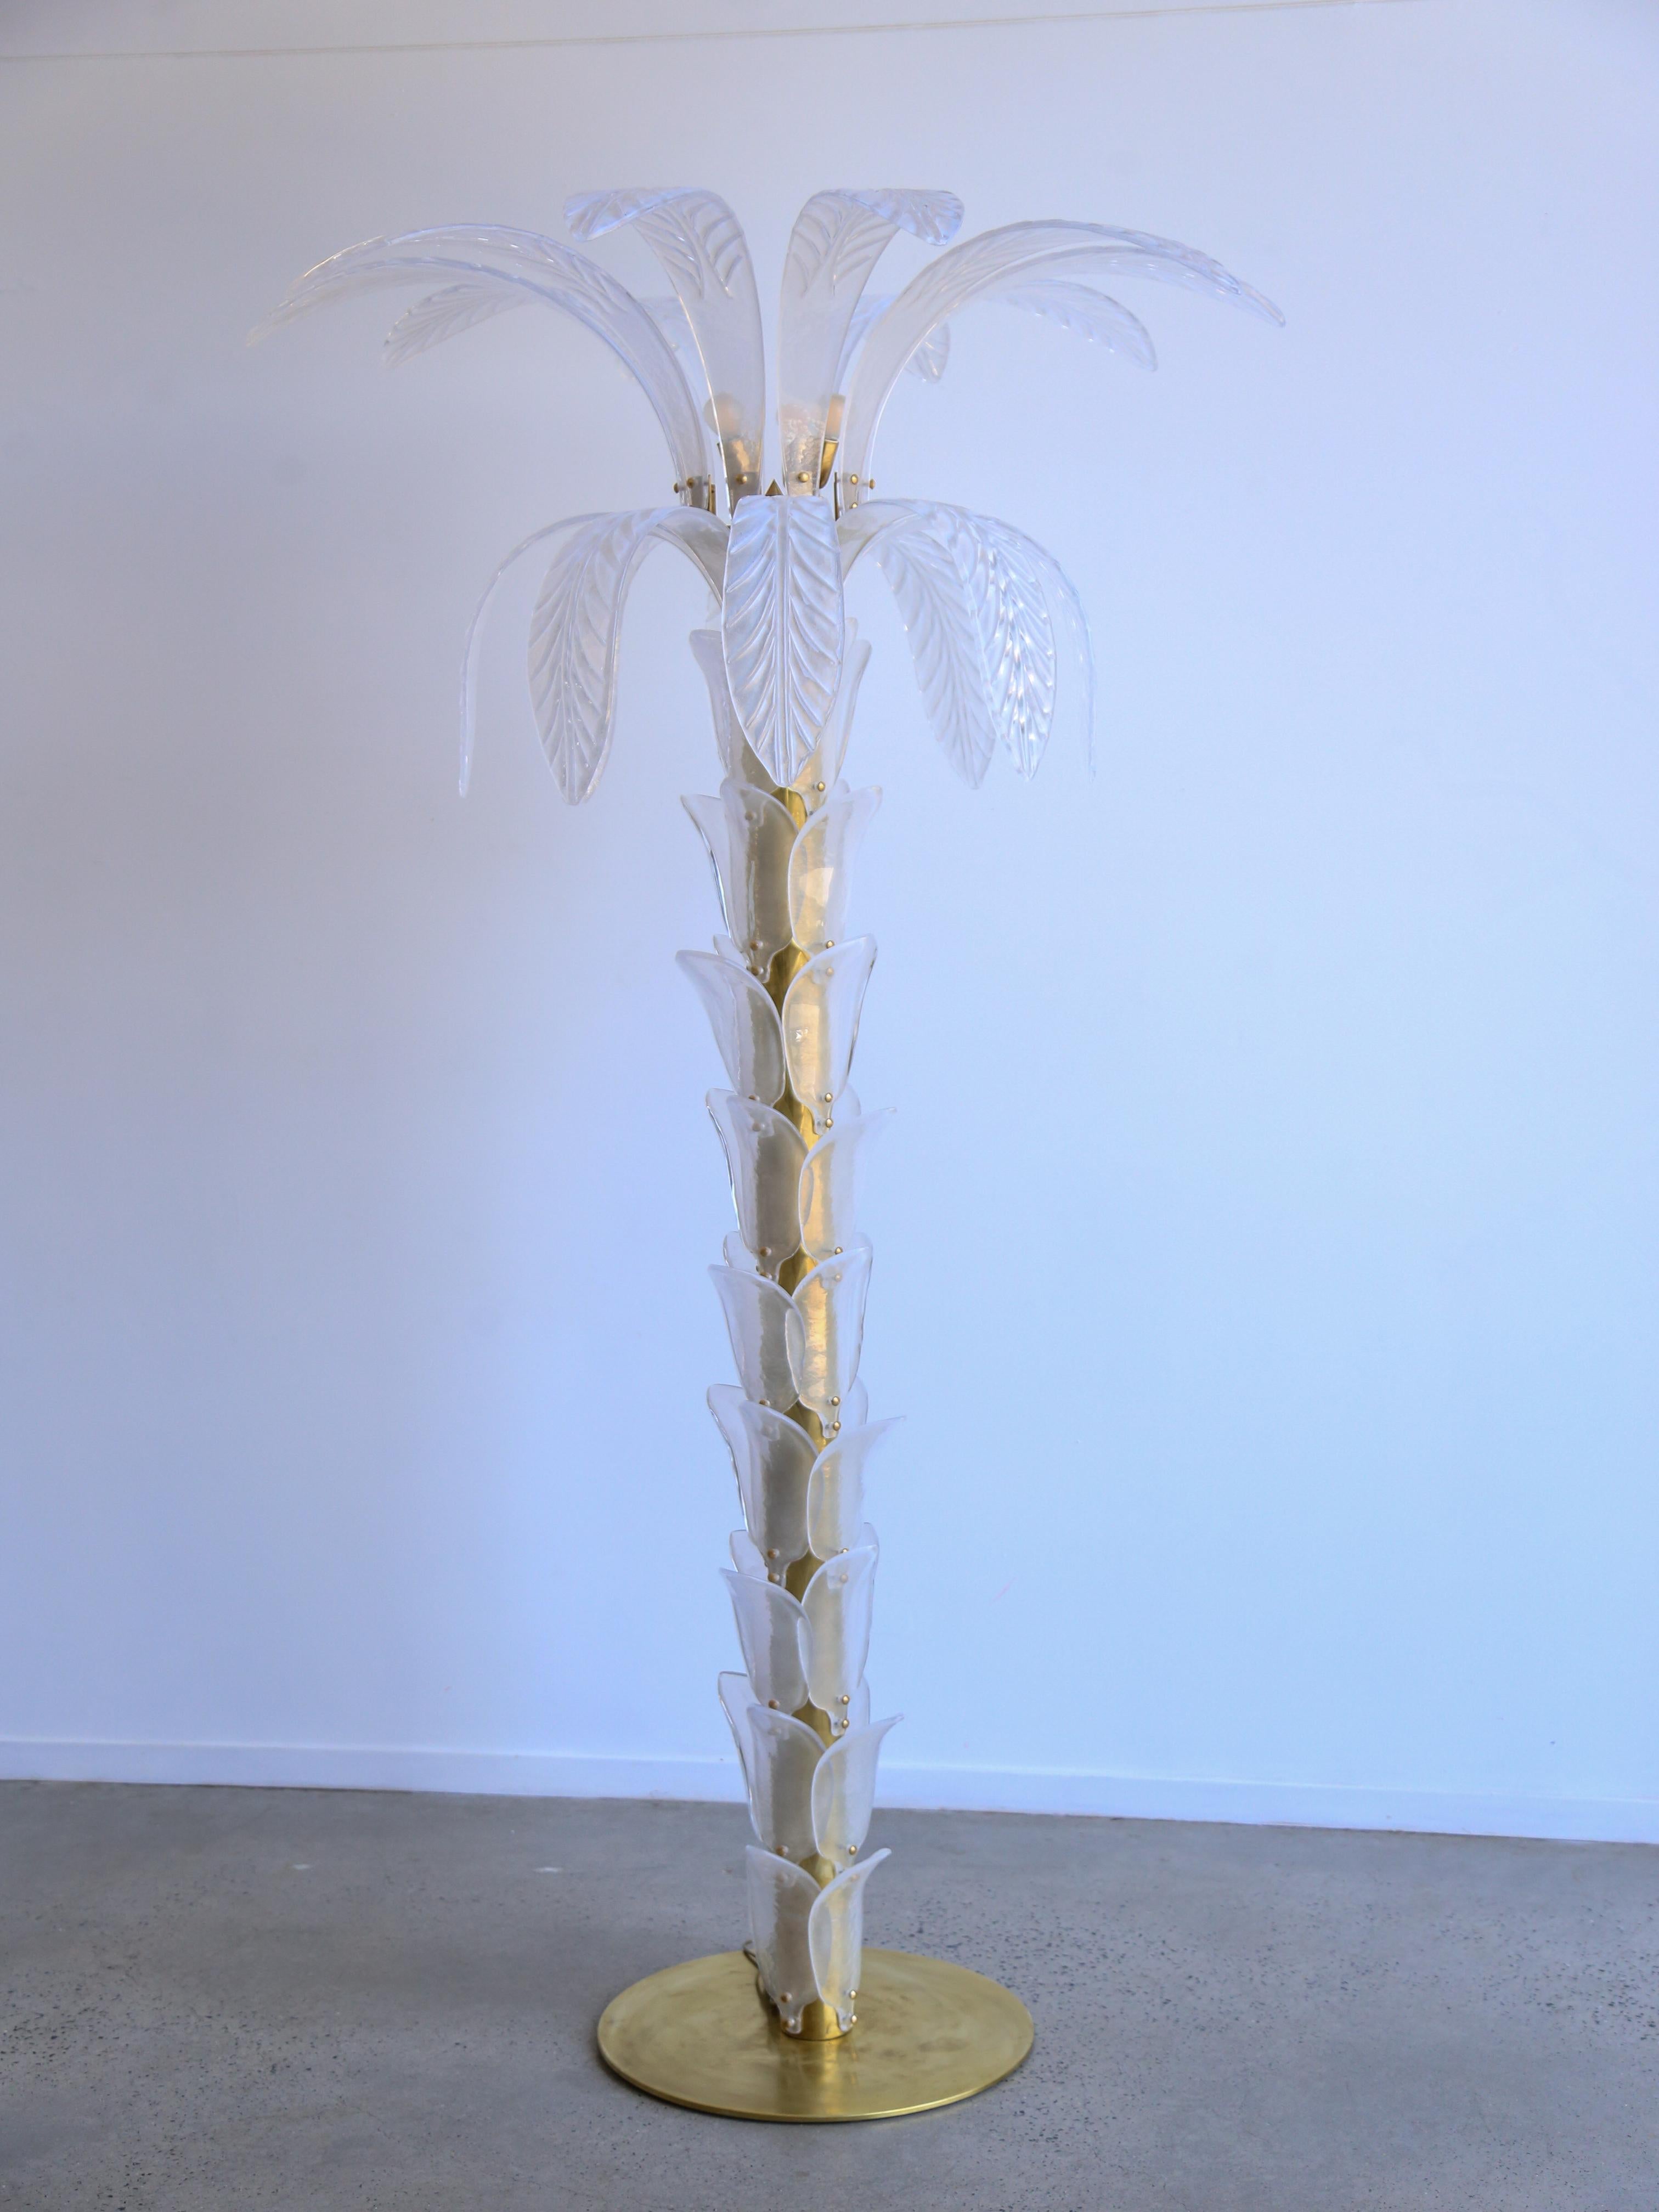 Large white-transparent floor lamp shaped like a palm tree, made of a brass circular base and trunk, covered with iridescent Murano glass leaves up to the top where large leaves burst out of the trunk, four lights inside the top section.
This is a